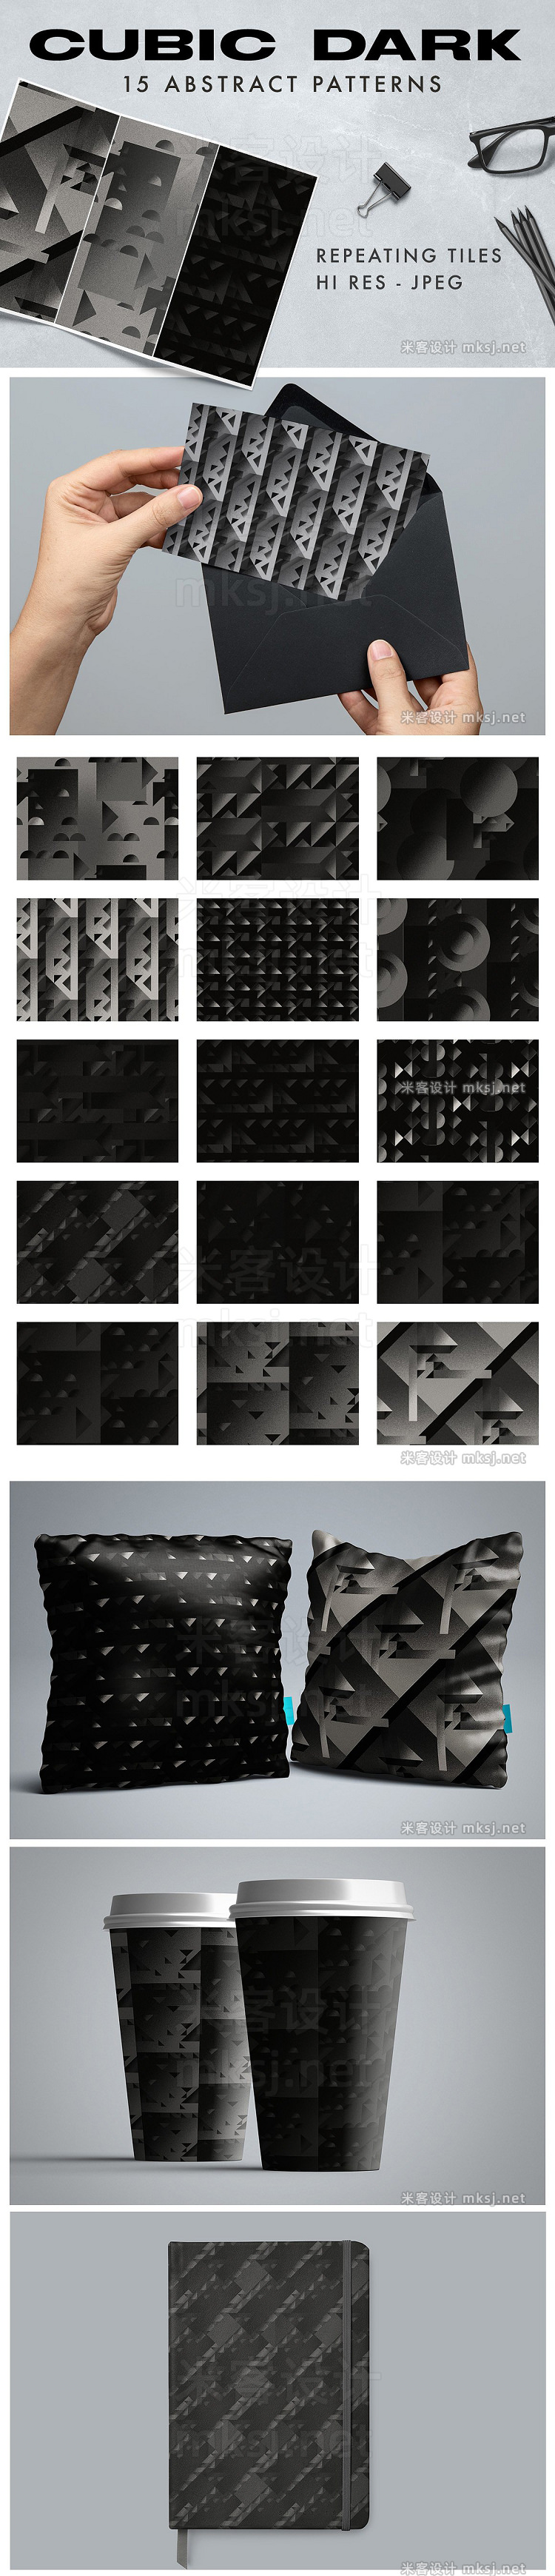 png素材 Cubic Dark Abstract Patterns